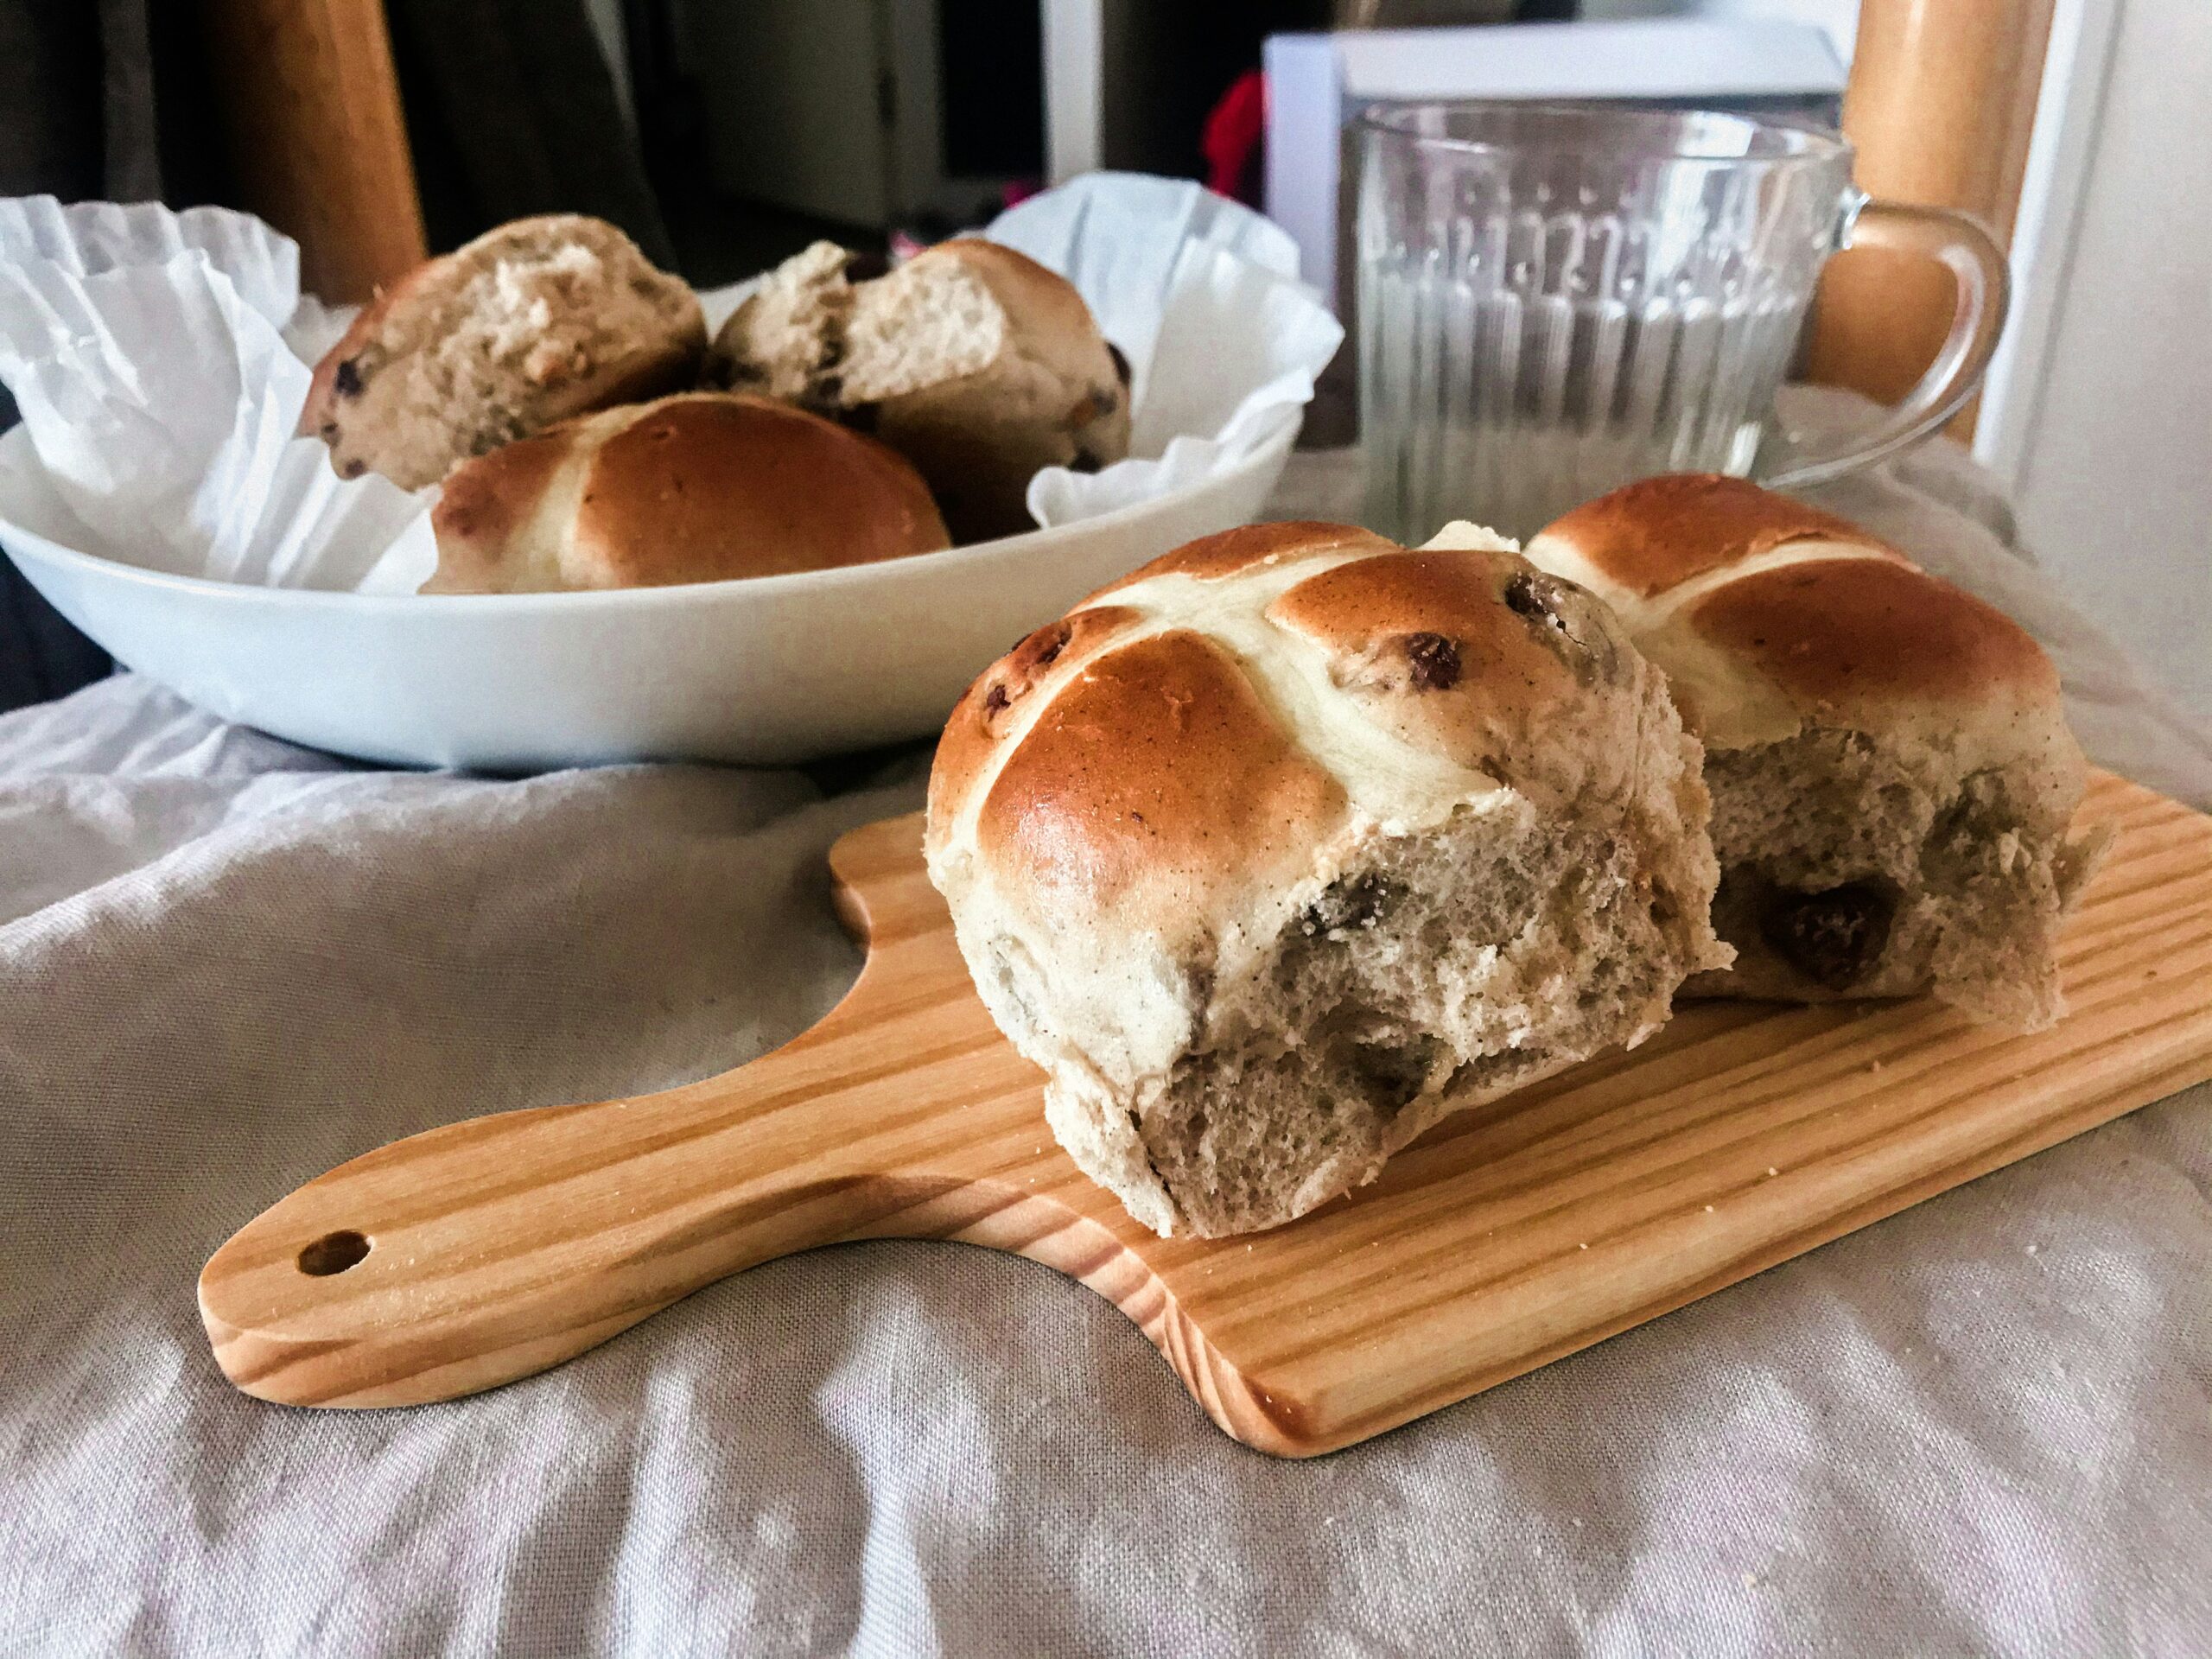 How To Make Hot Cross Buns